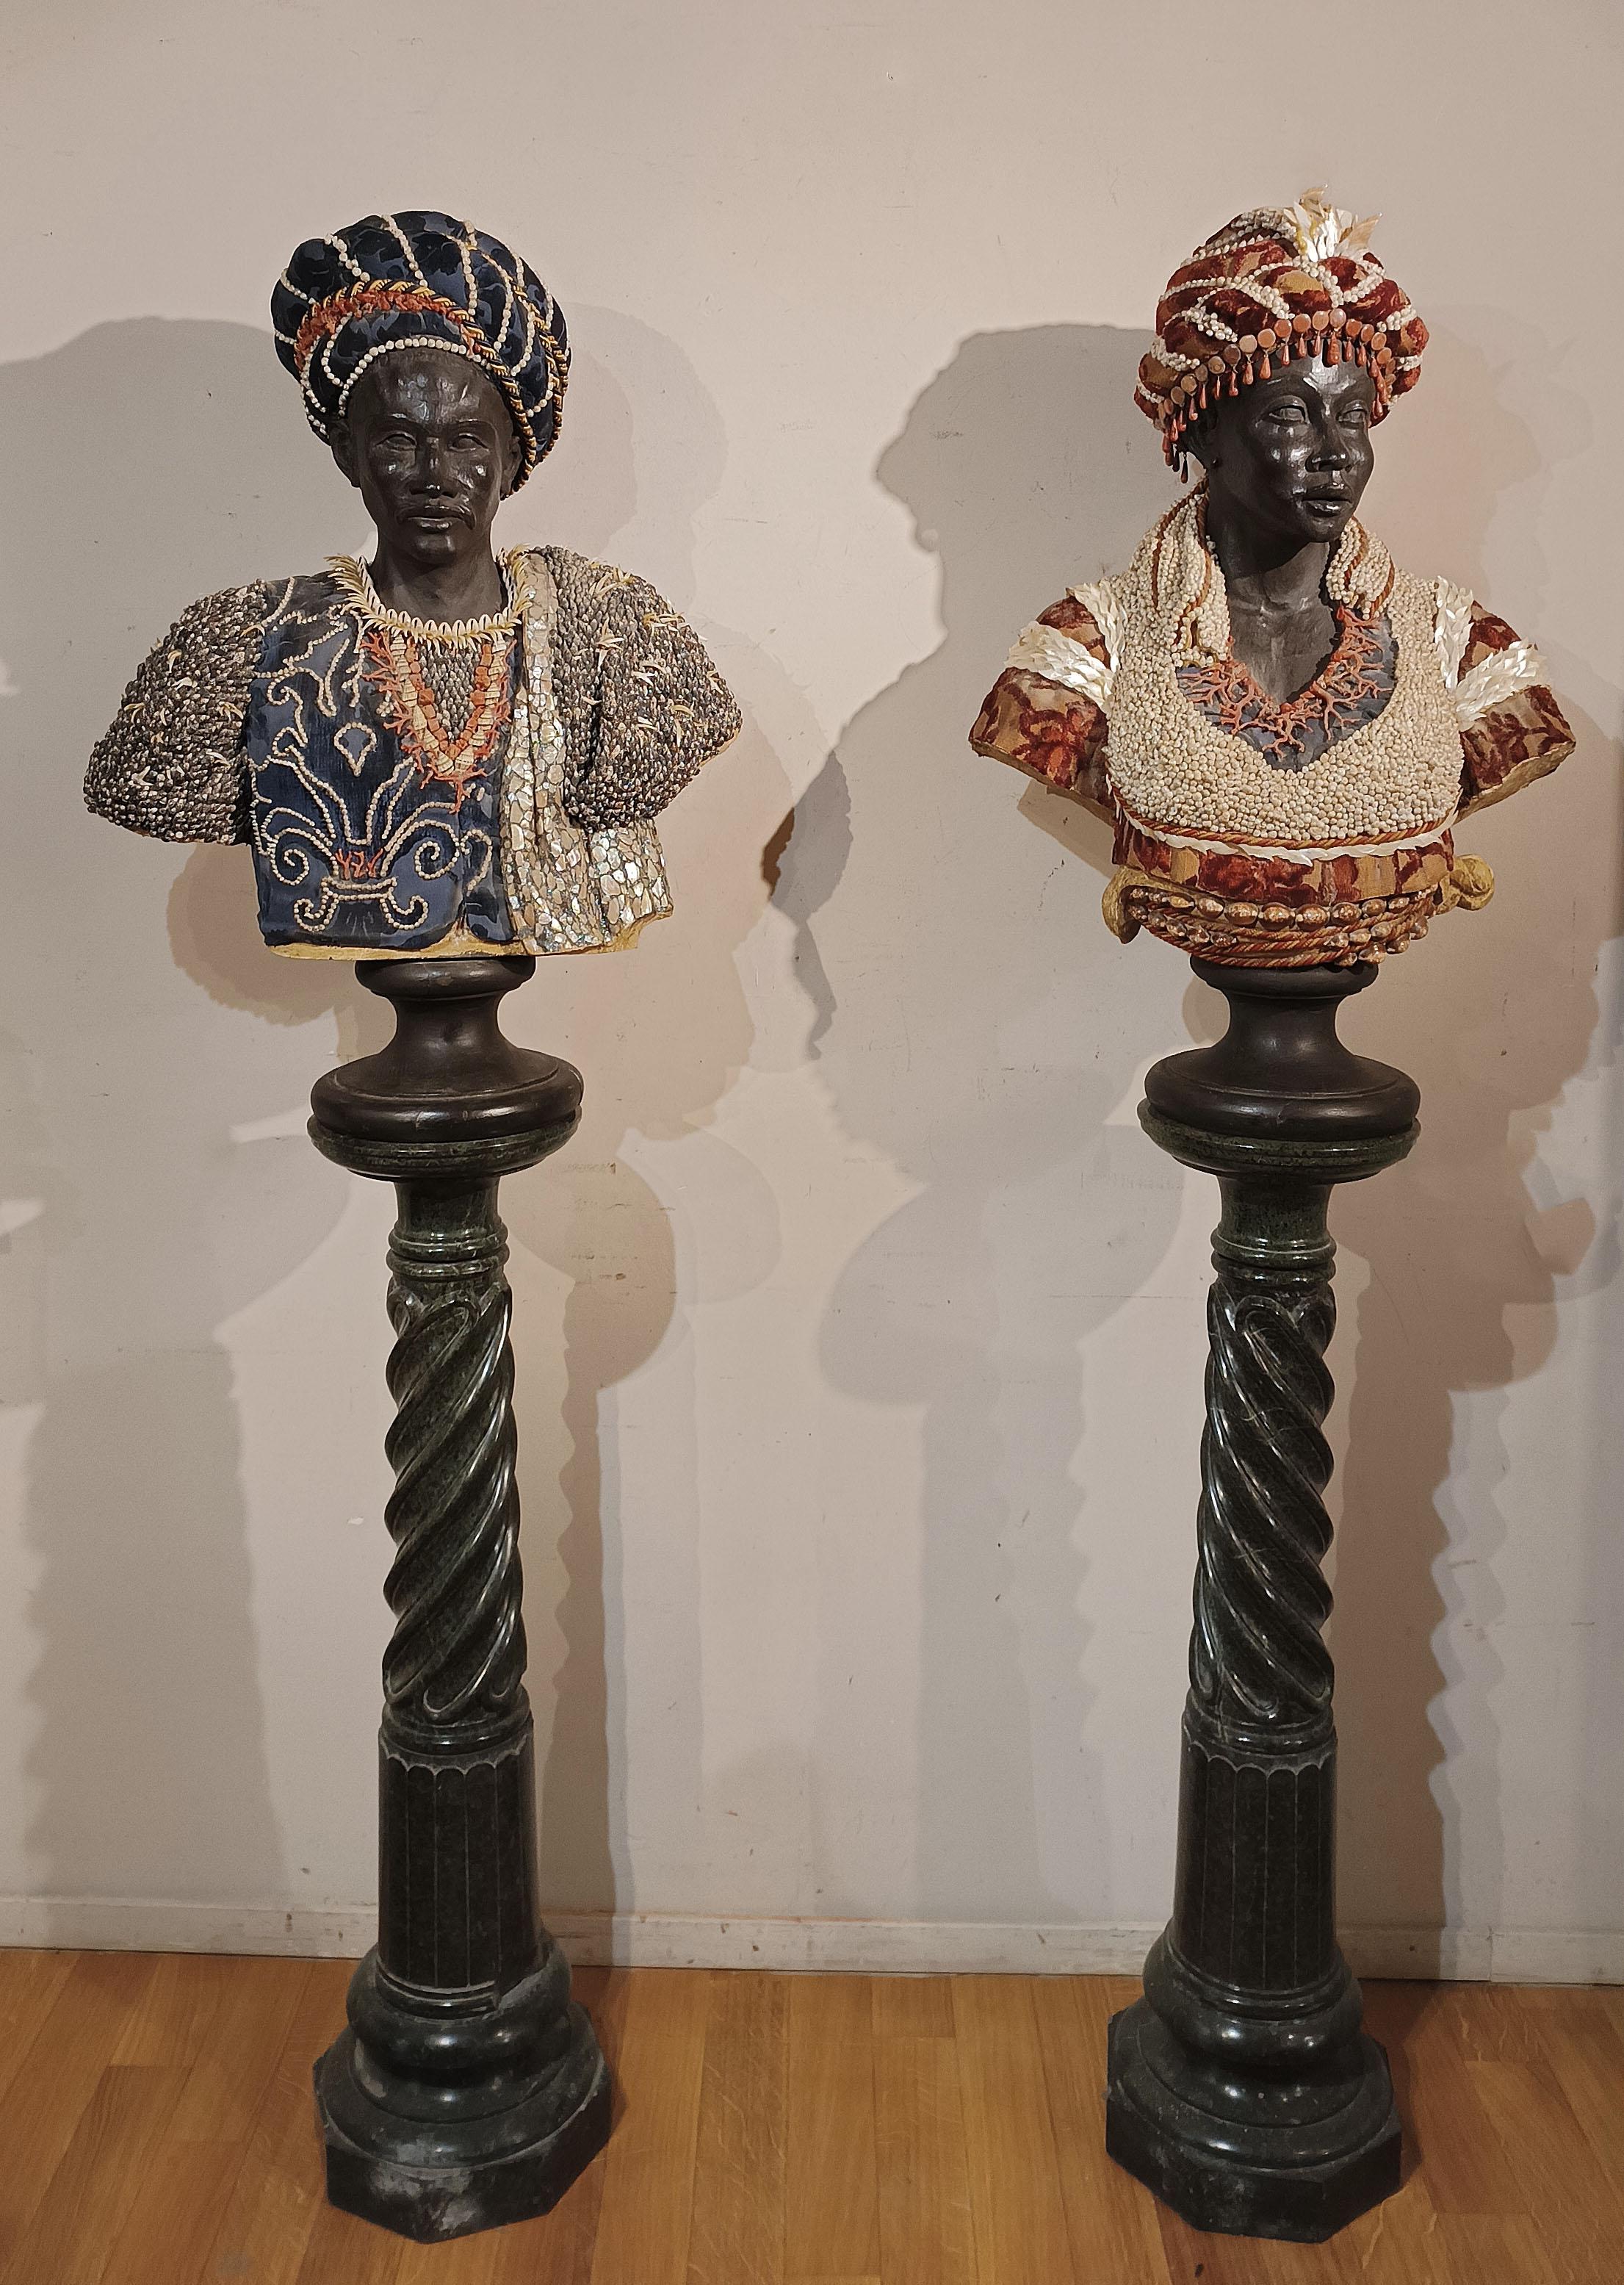 Unique and elegant pair of ebonized carved wooden sculptures depicting two Sicilian 